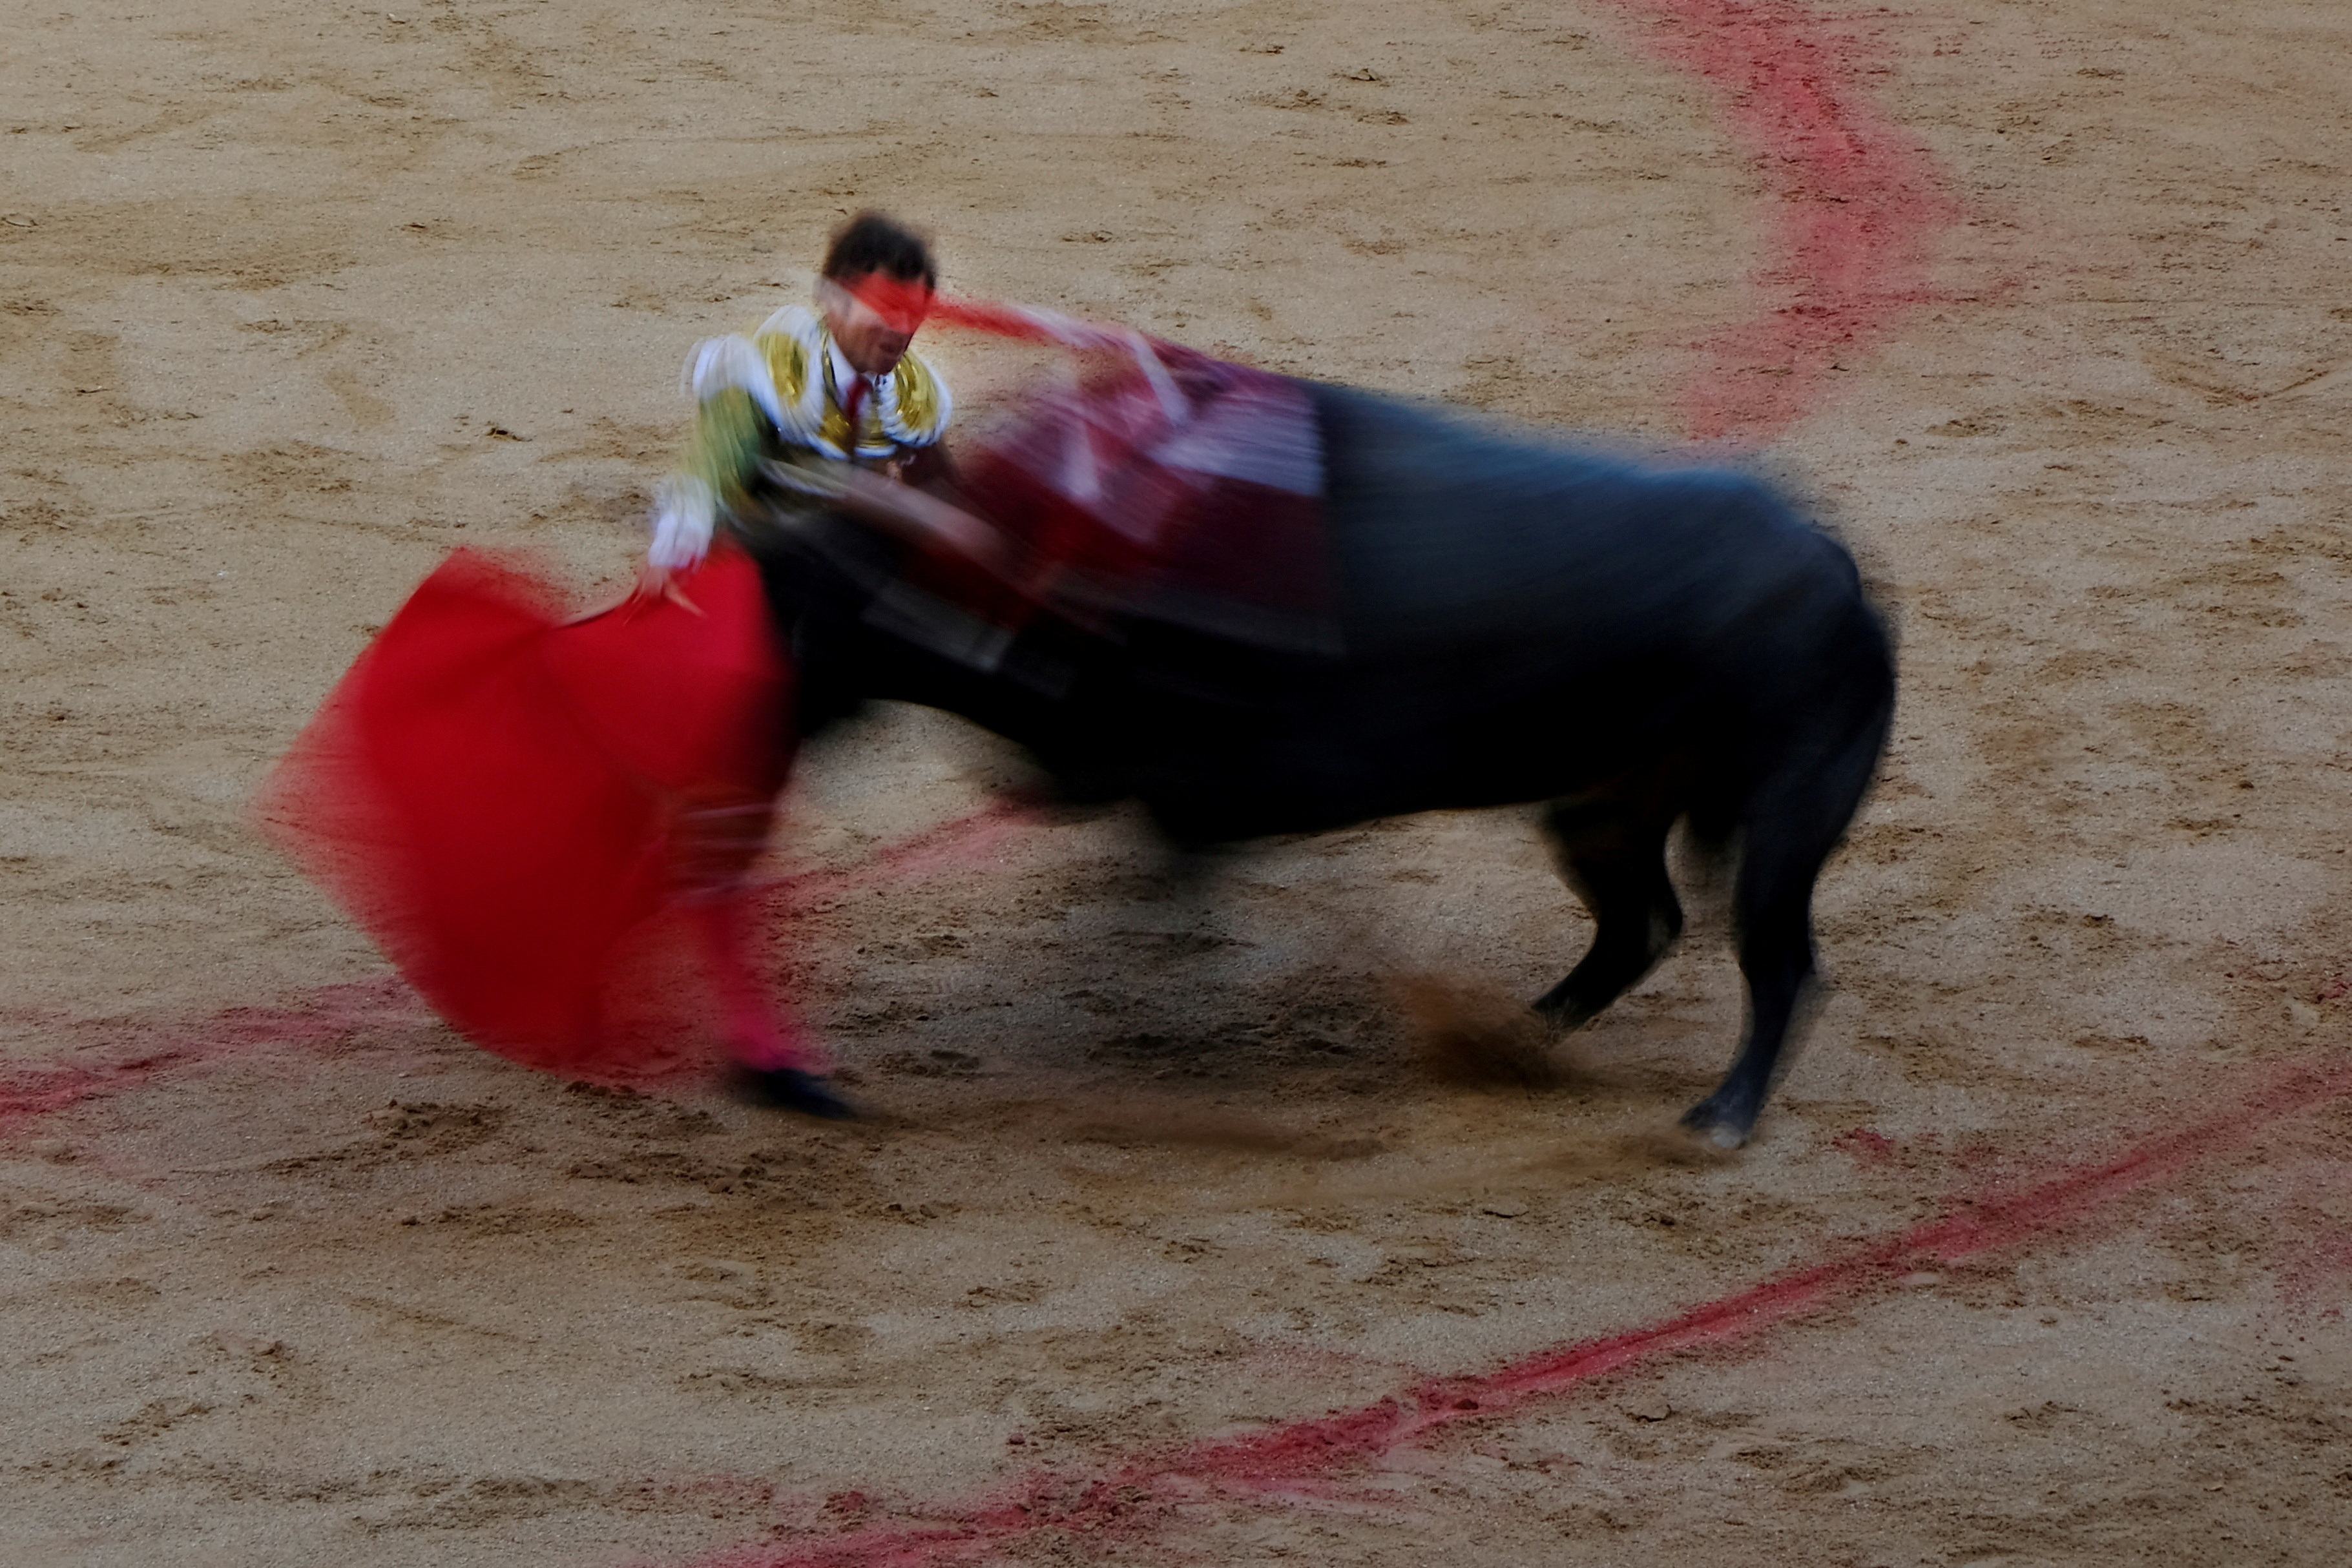 Seville bullring livens debate with move to let children in free